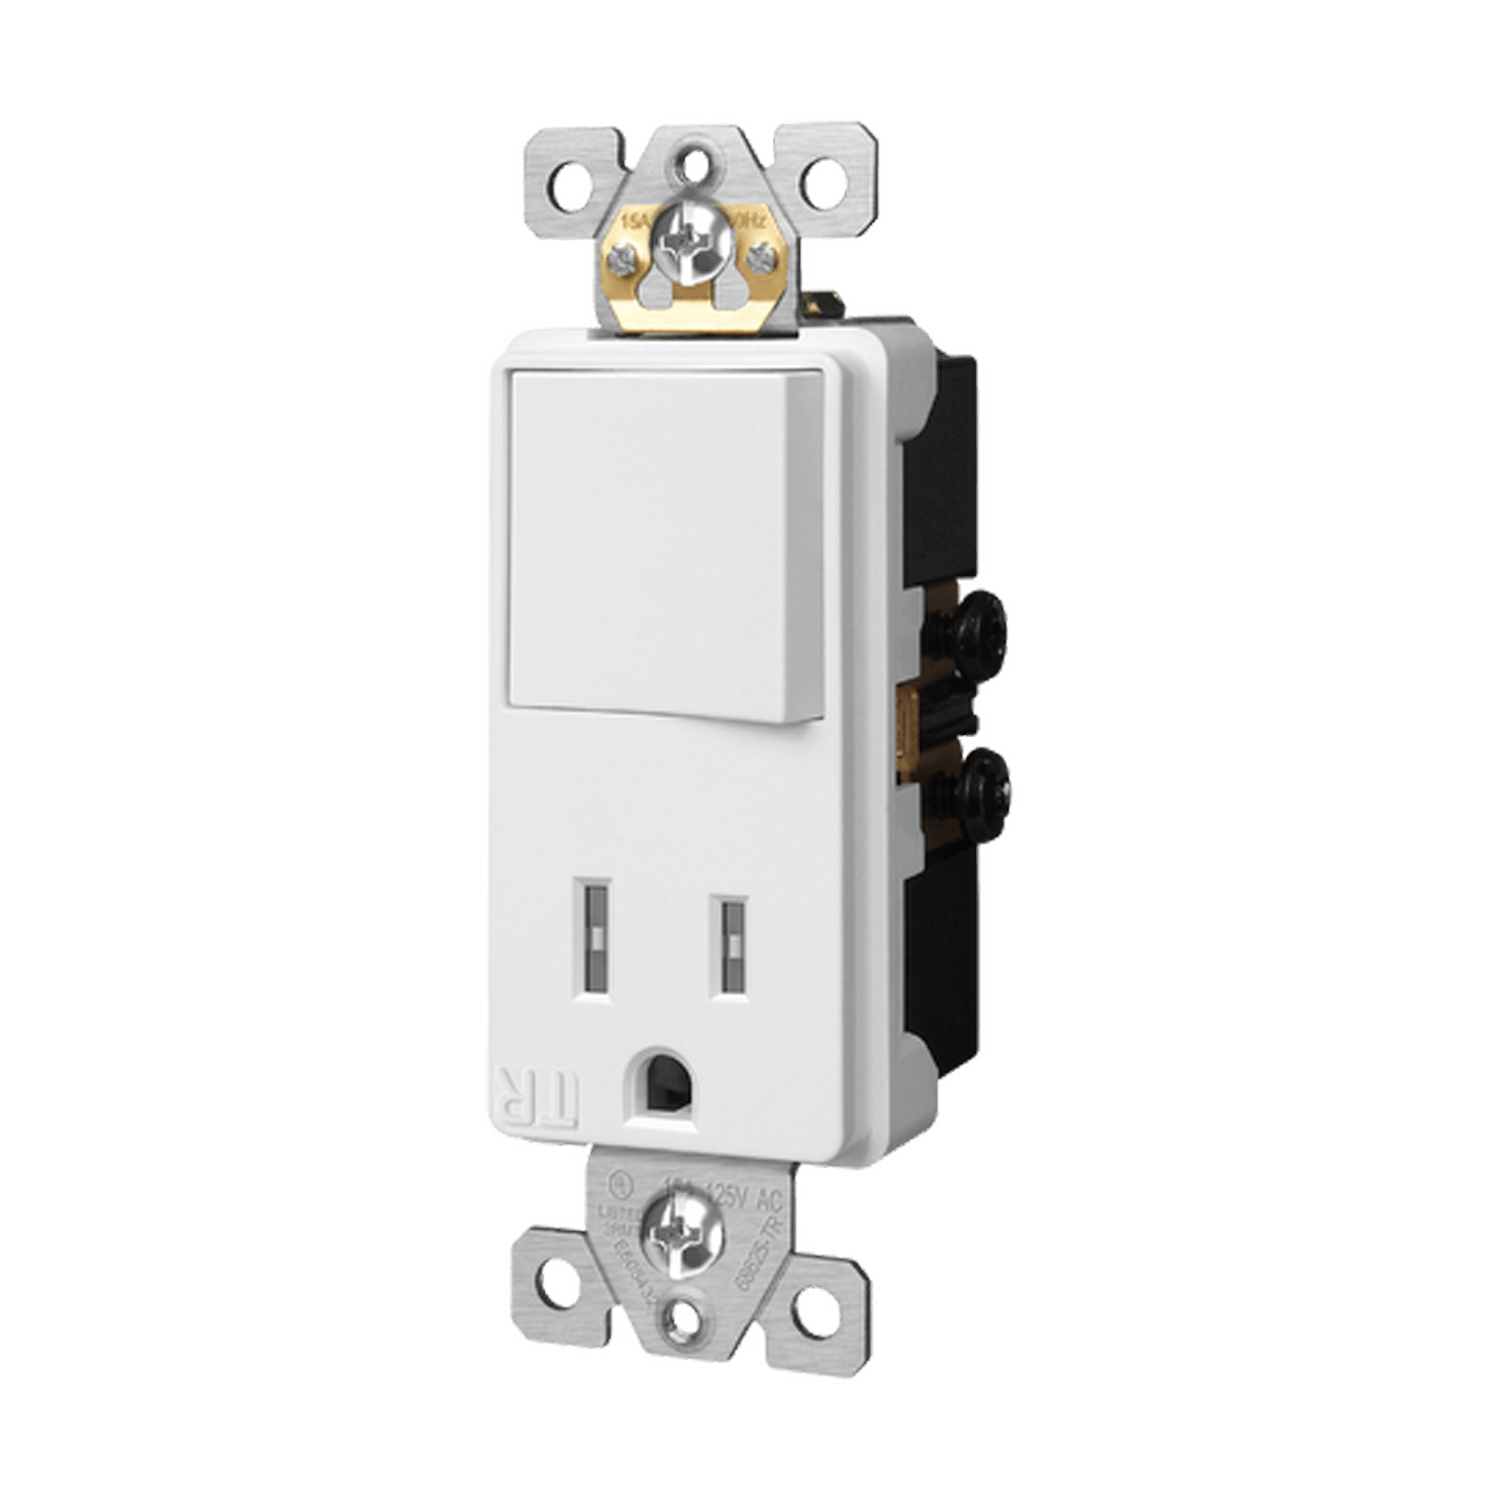 Enerlites 15 Amp Single Pole Tamper Resistant Combination Receptacle and Light Switch - White - Sonic Electric